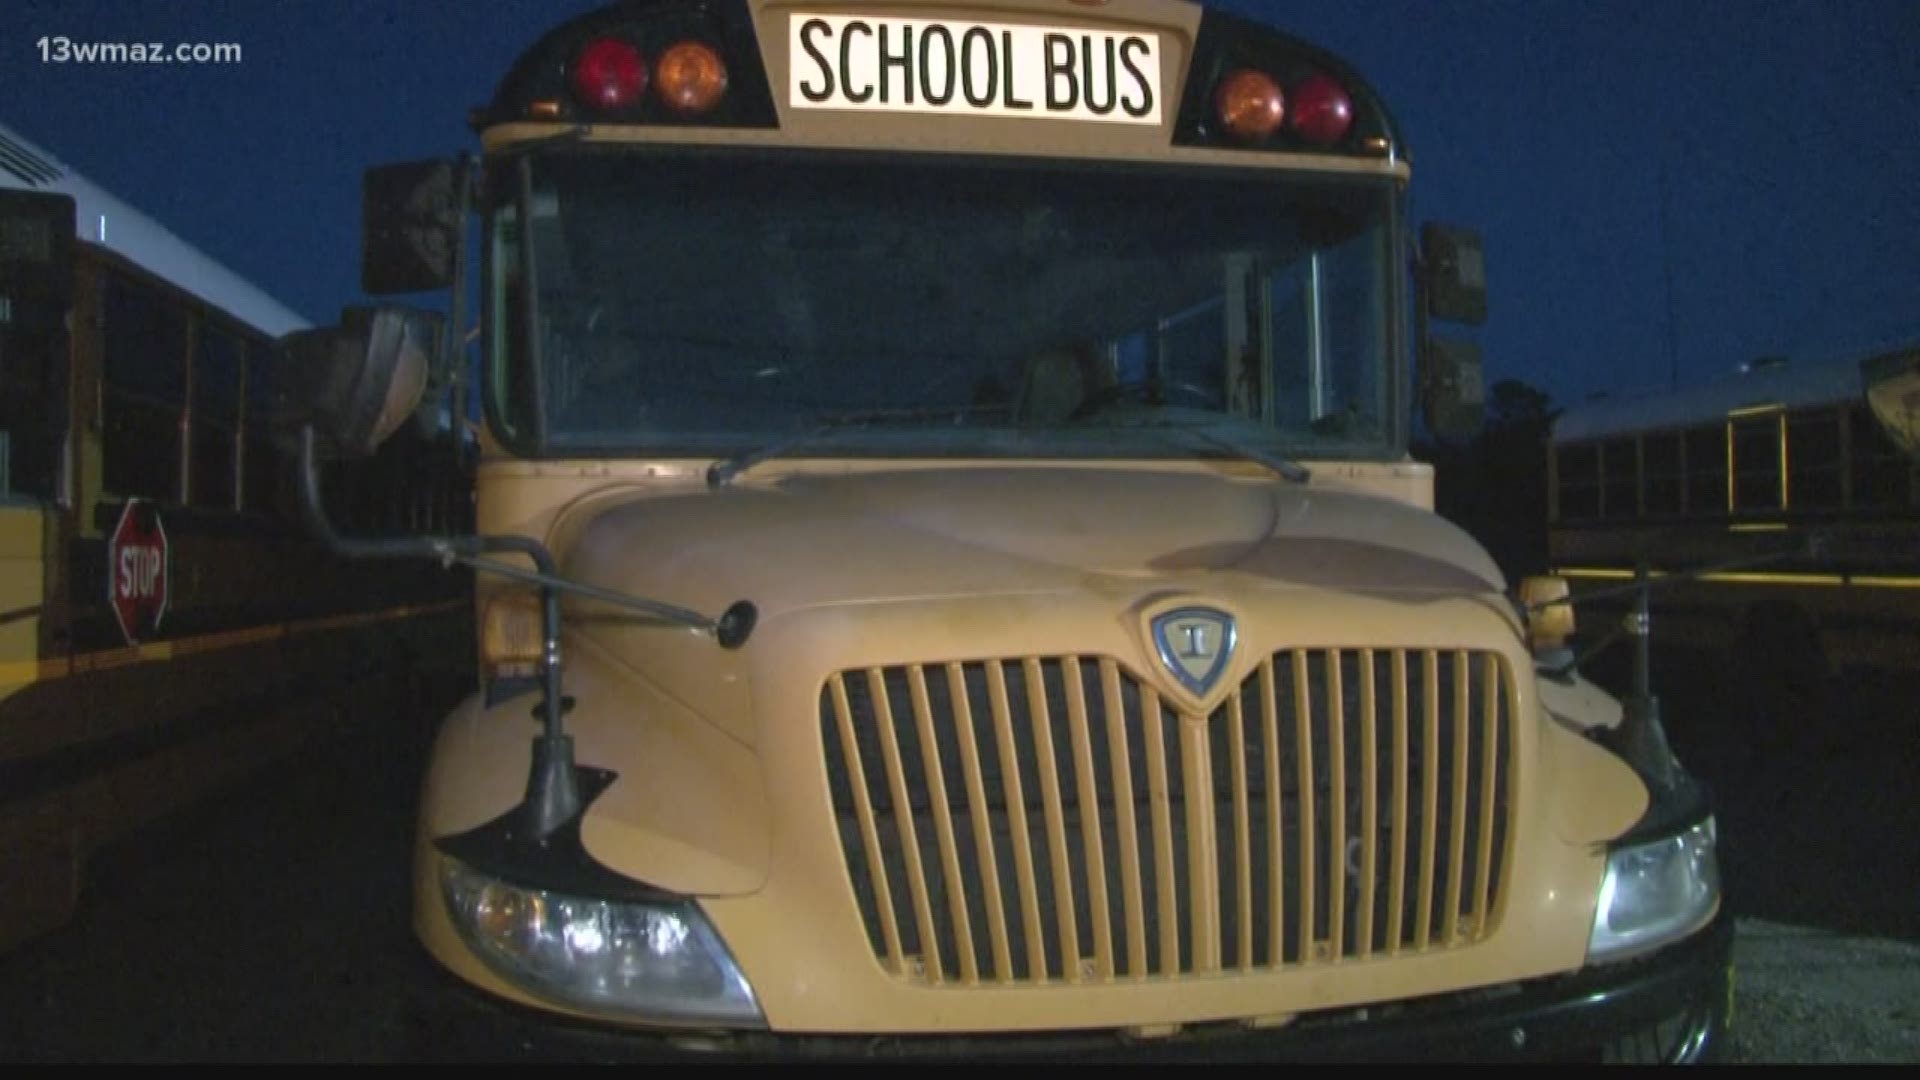 Jones County school bus accident leaves boy with injuries